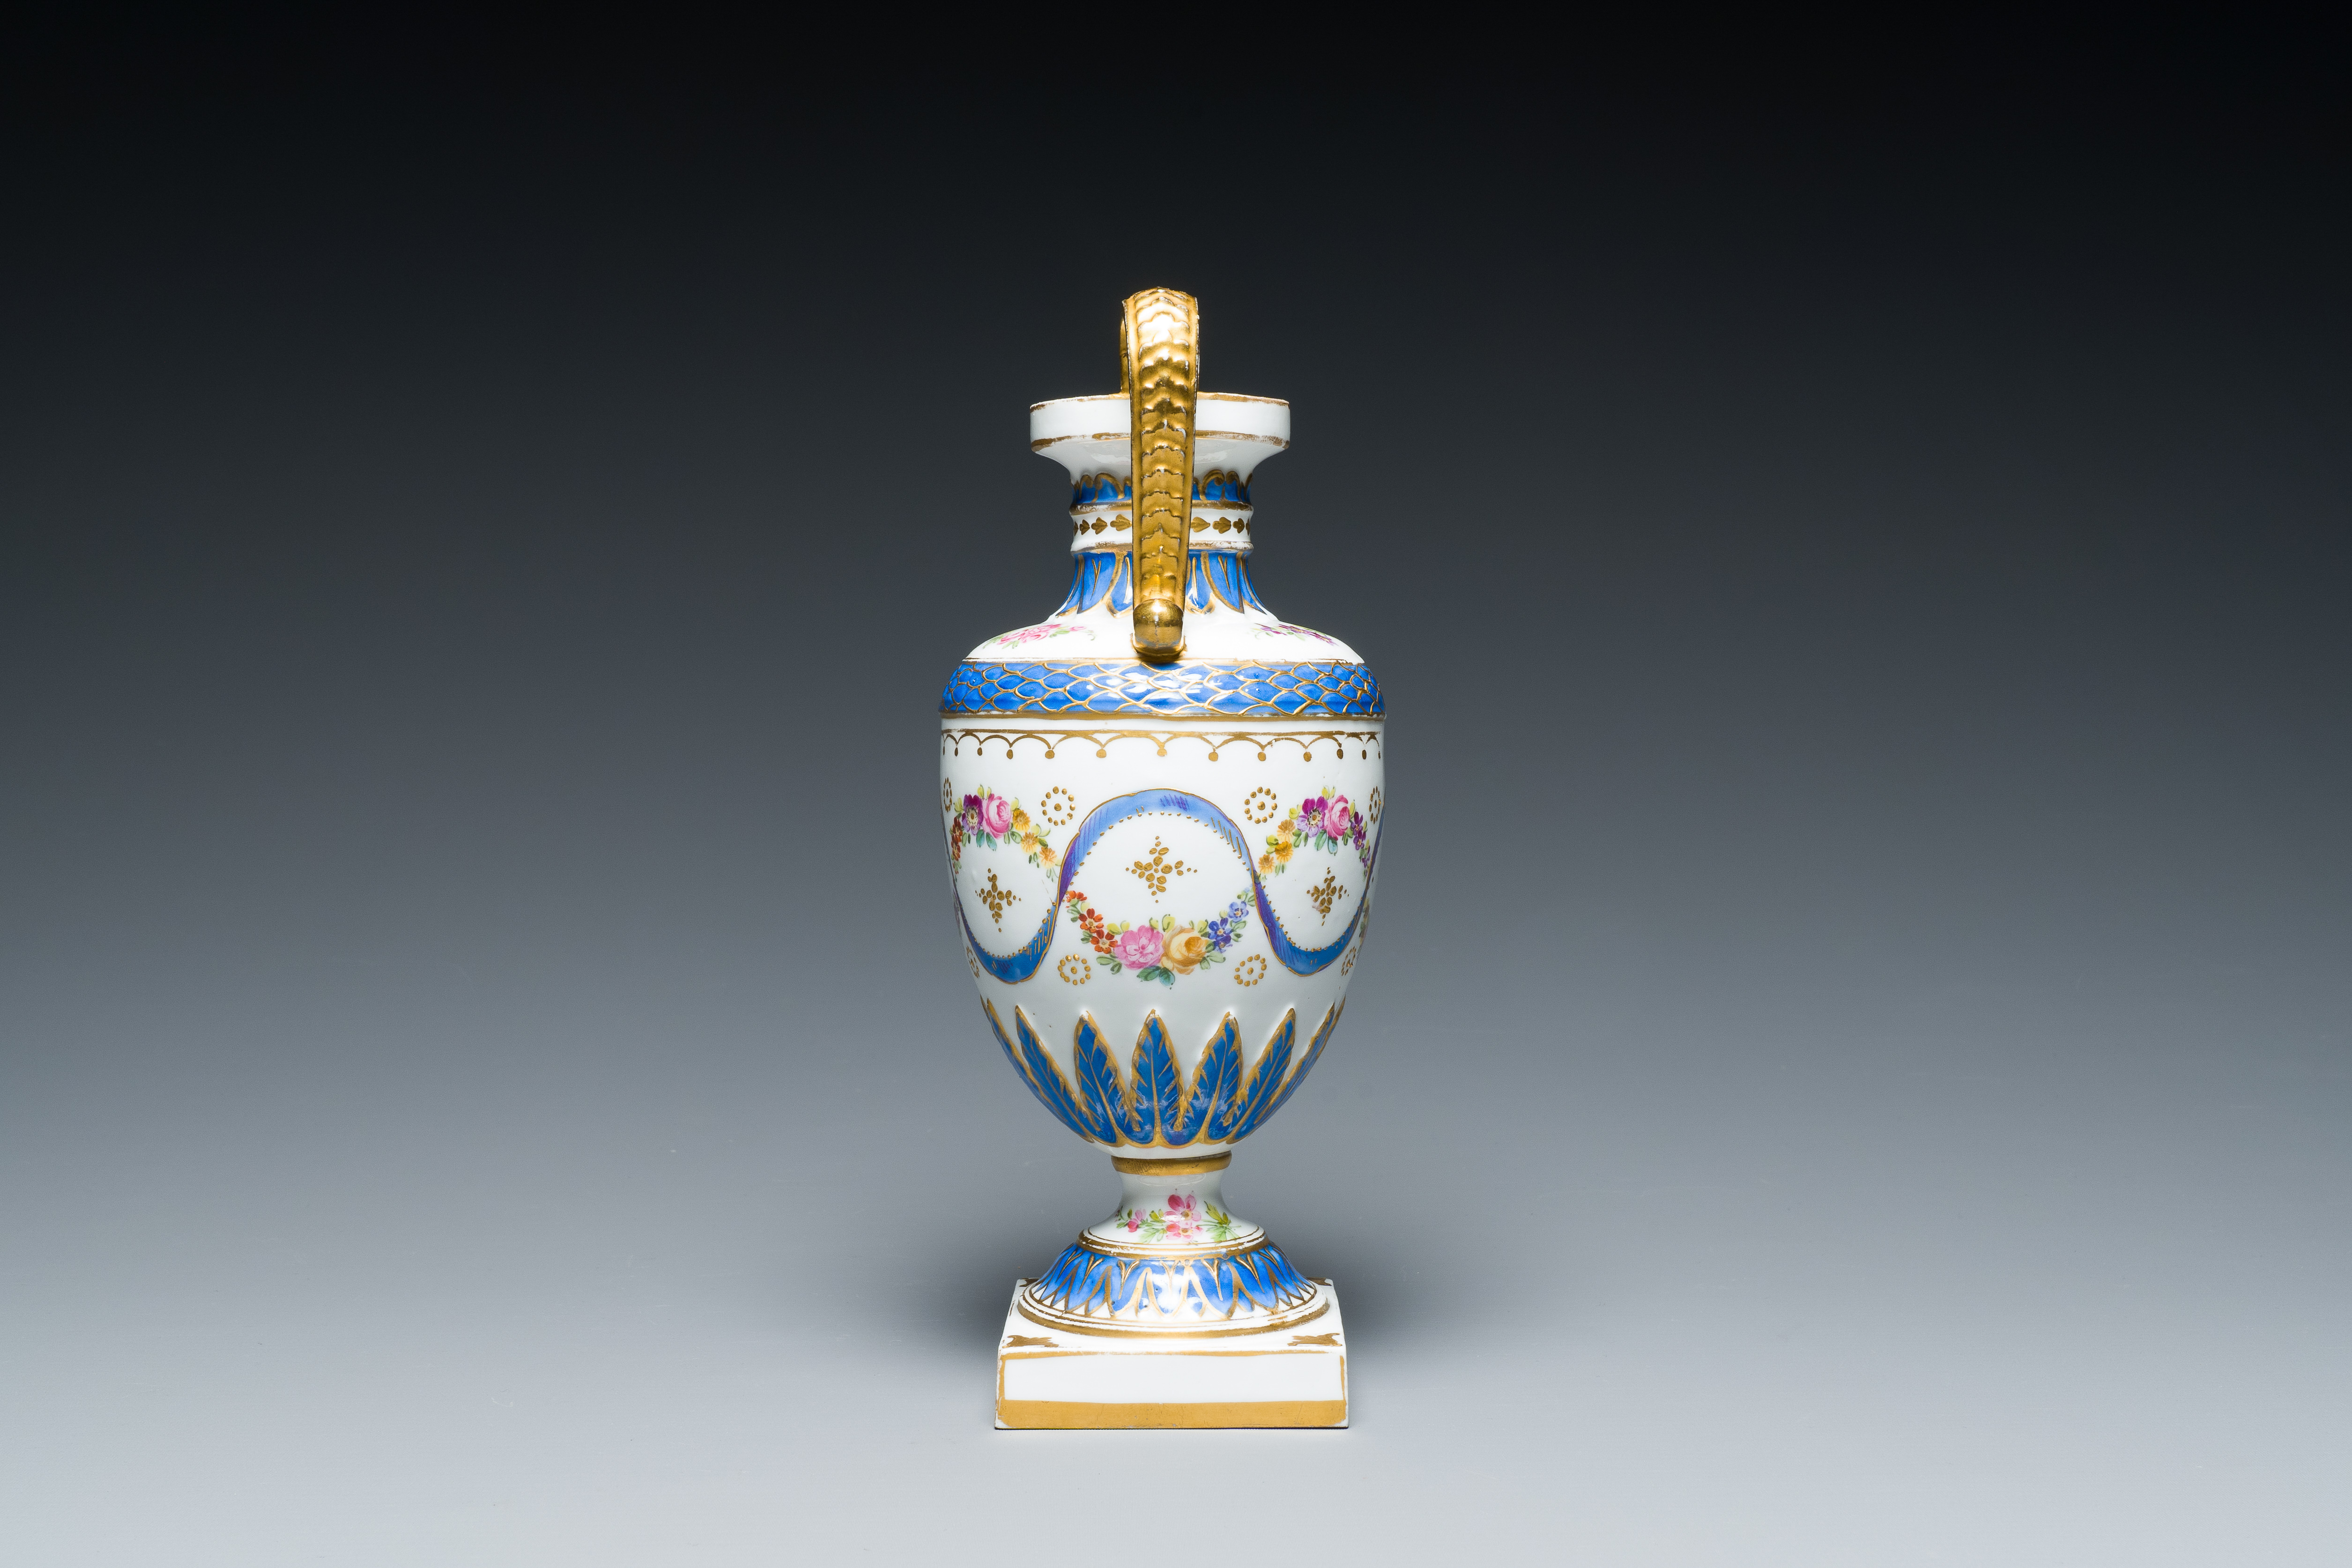 A French polychrome porcelain Sevres-style vase, 19th C. - Image 8 of 16